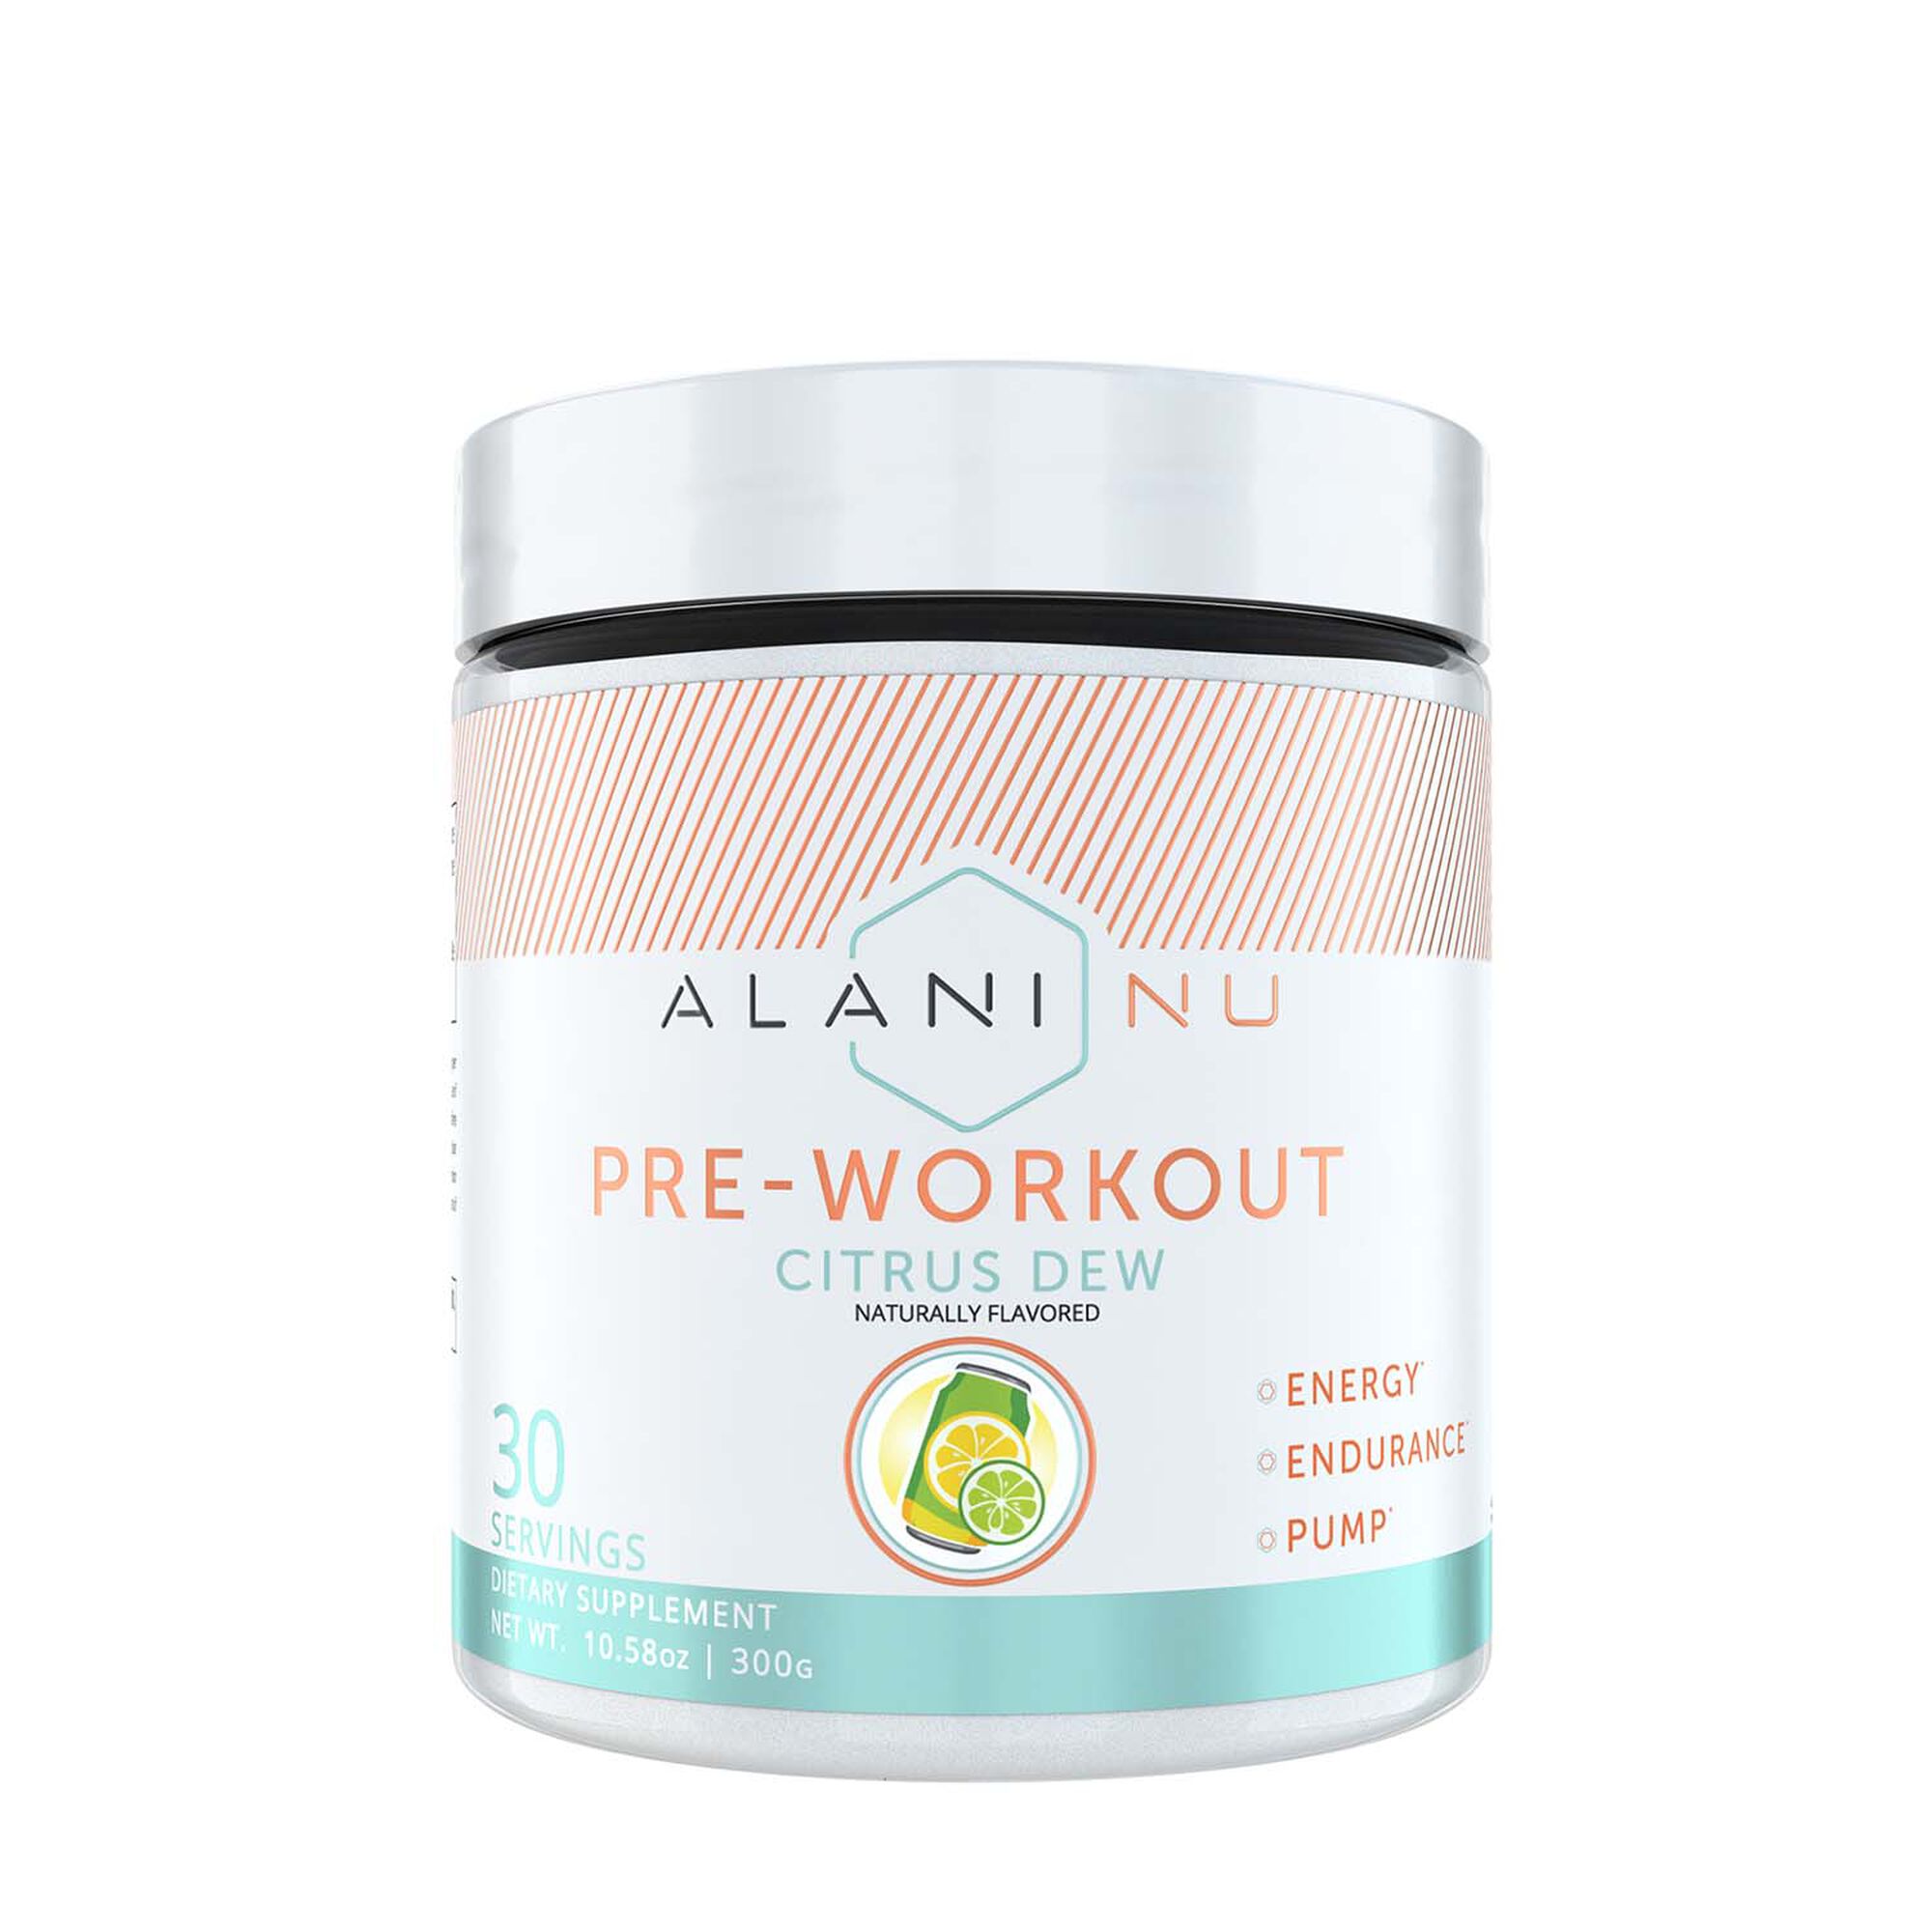  Alani Nu Best Pre Workout Flavor for Weight Loss